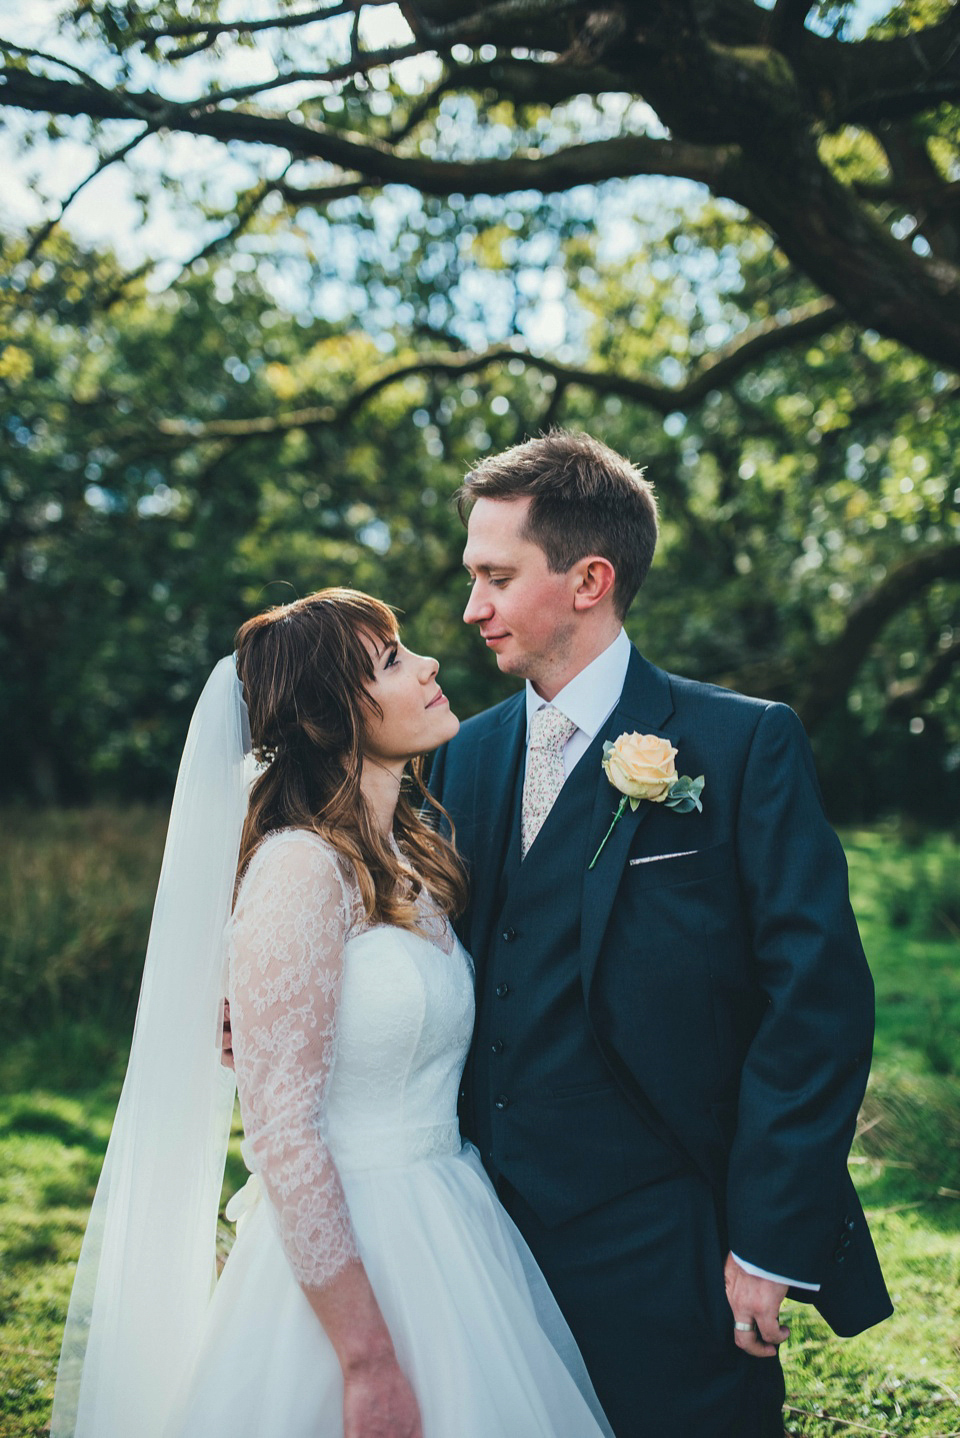 Hannah wore a Caroline Castigliano gown for her wedding to Matt. Photography by Nicola Thompson, film by Magic Hour Films